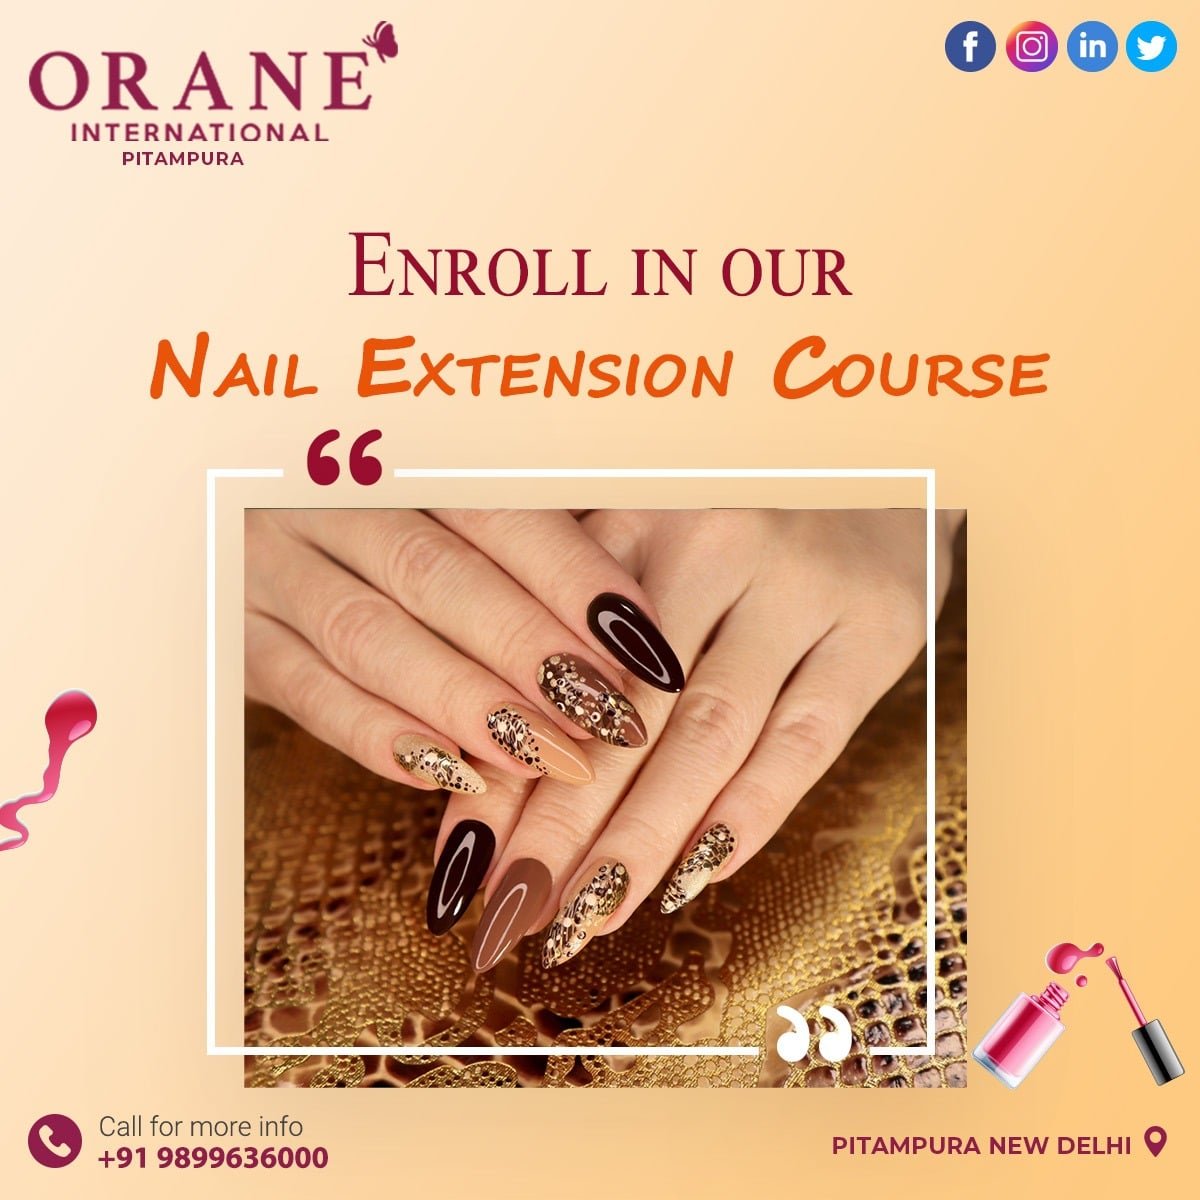 Know Everything About The Nail Artist Course & Career